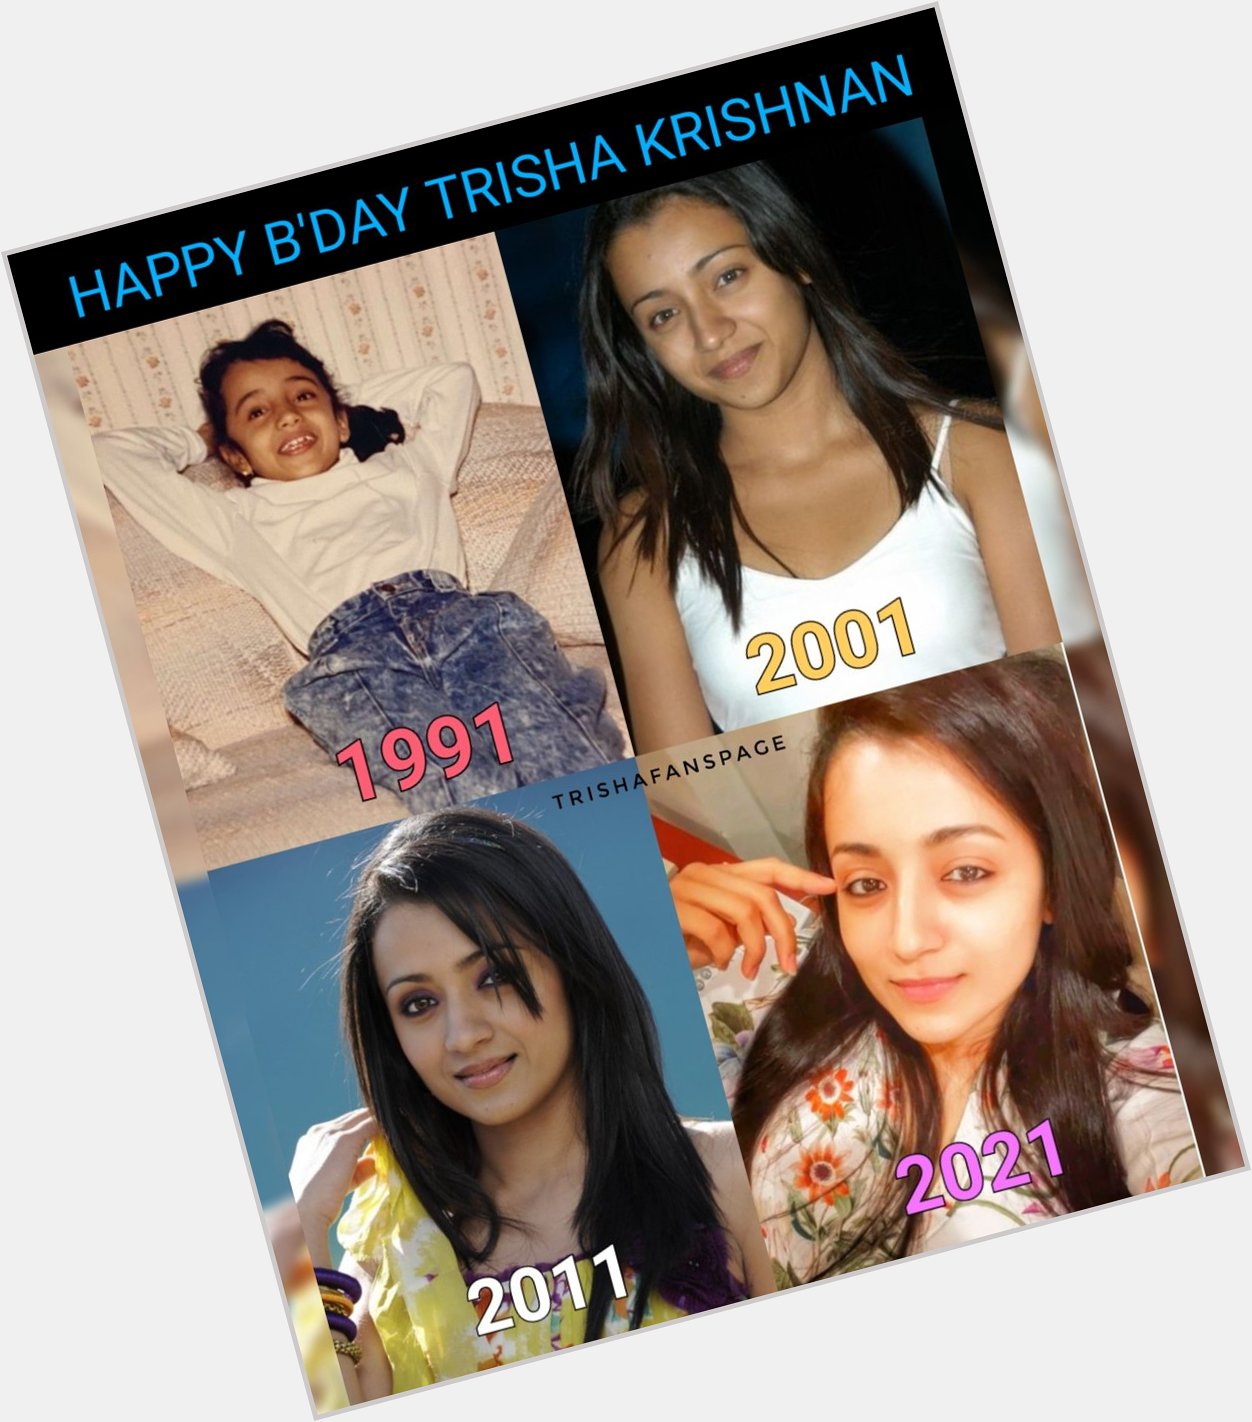 Happy birthday to the Trisha krishnan wishing you all the happiness in life god bless you 